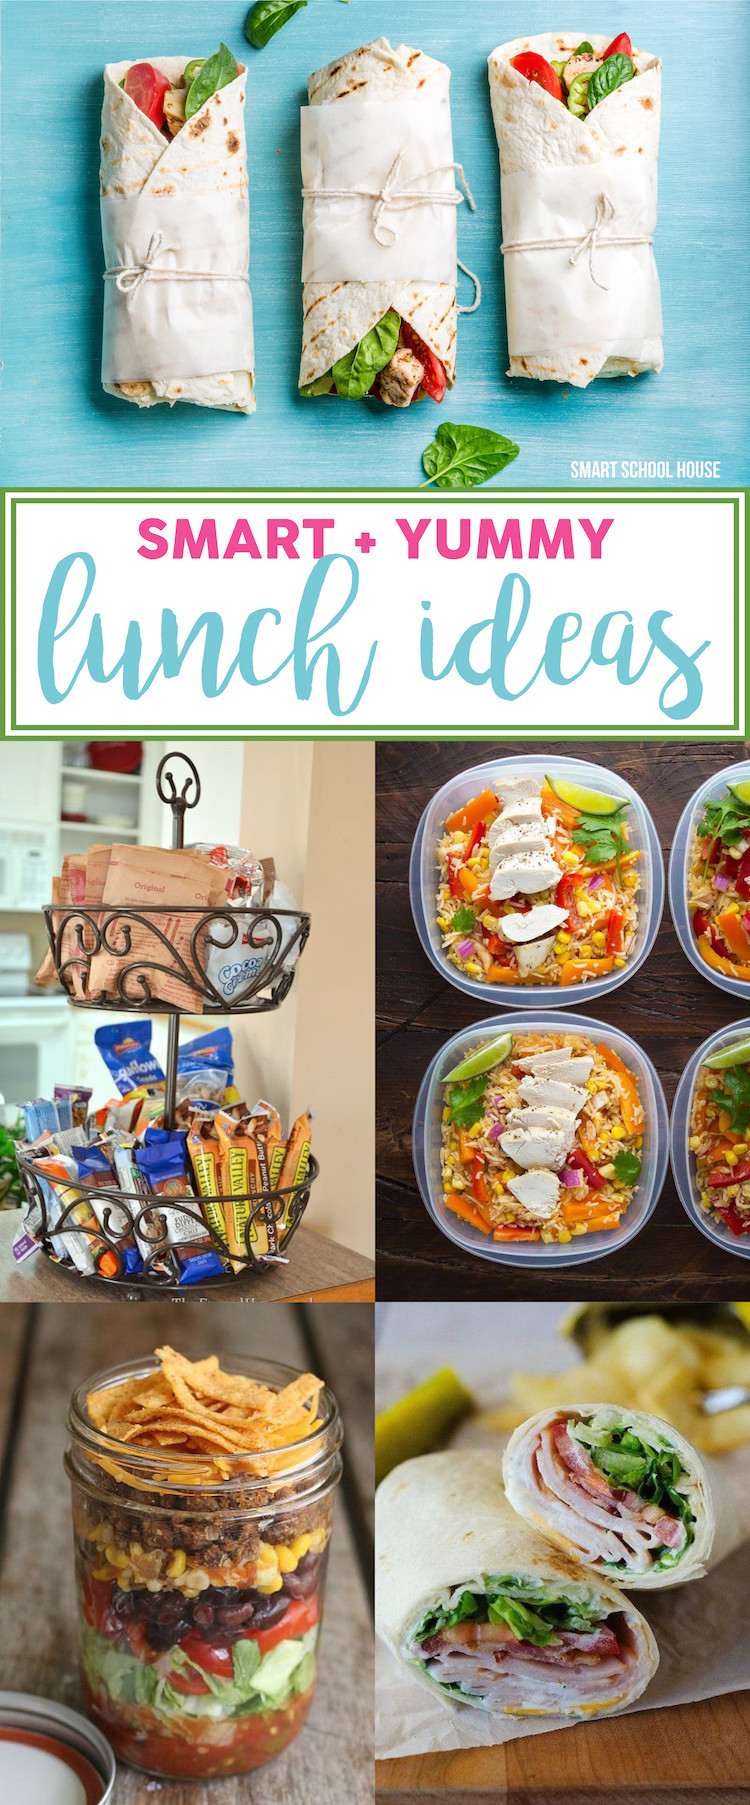 Yummy Healthy Lunches
 Smart and Yummy lunch ideas